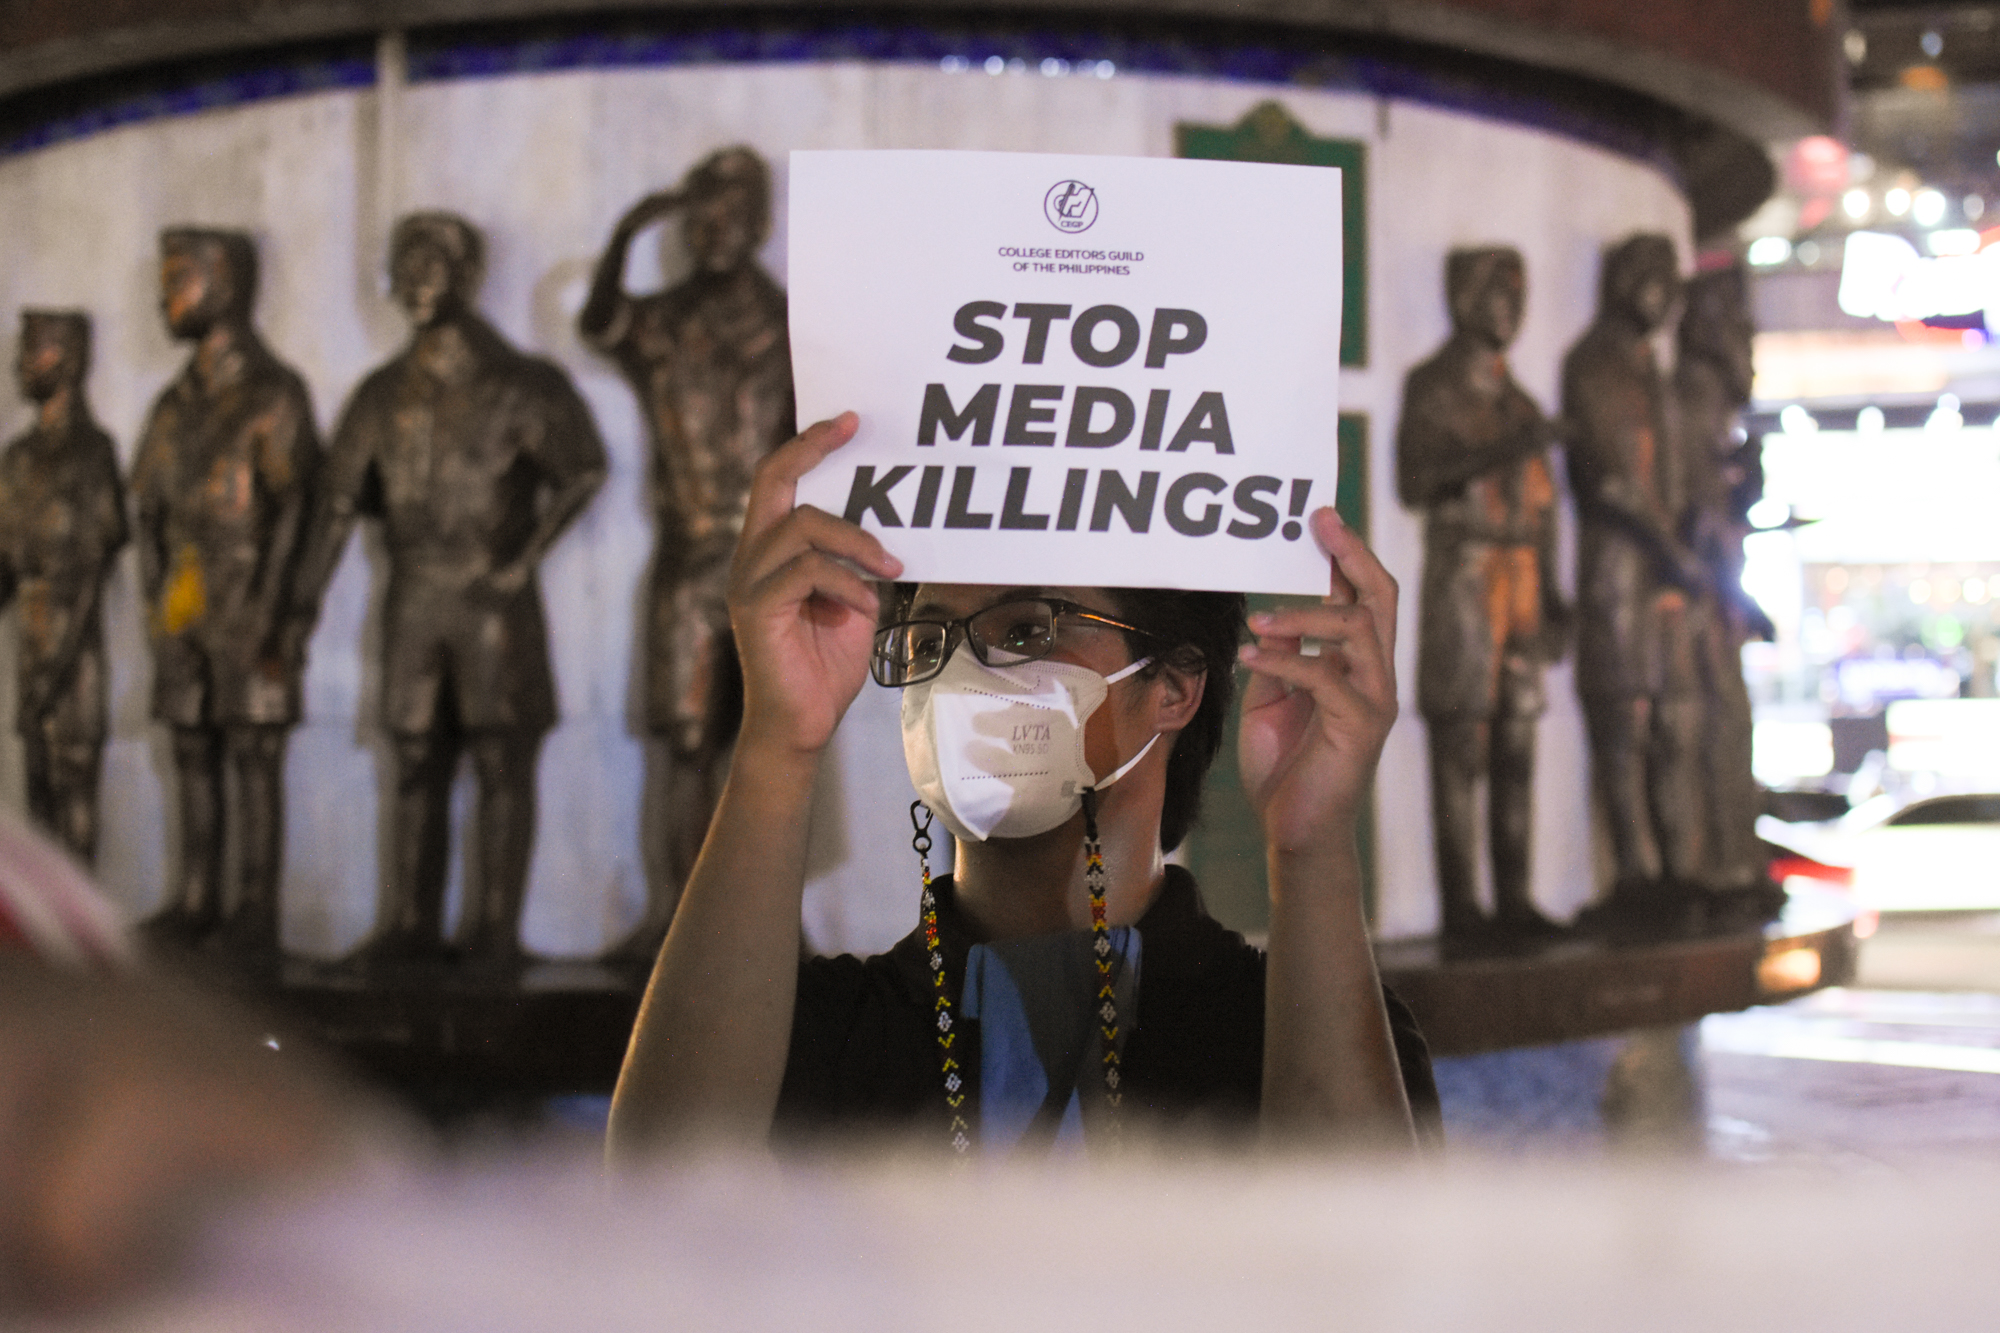 For 15 years, Philippines remains one of most deadly countries for journalists